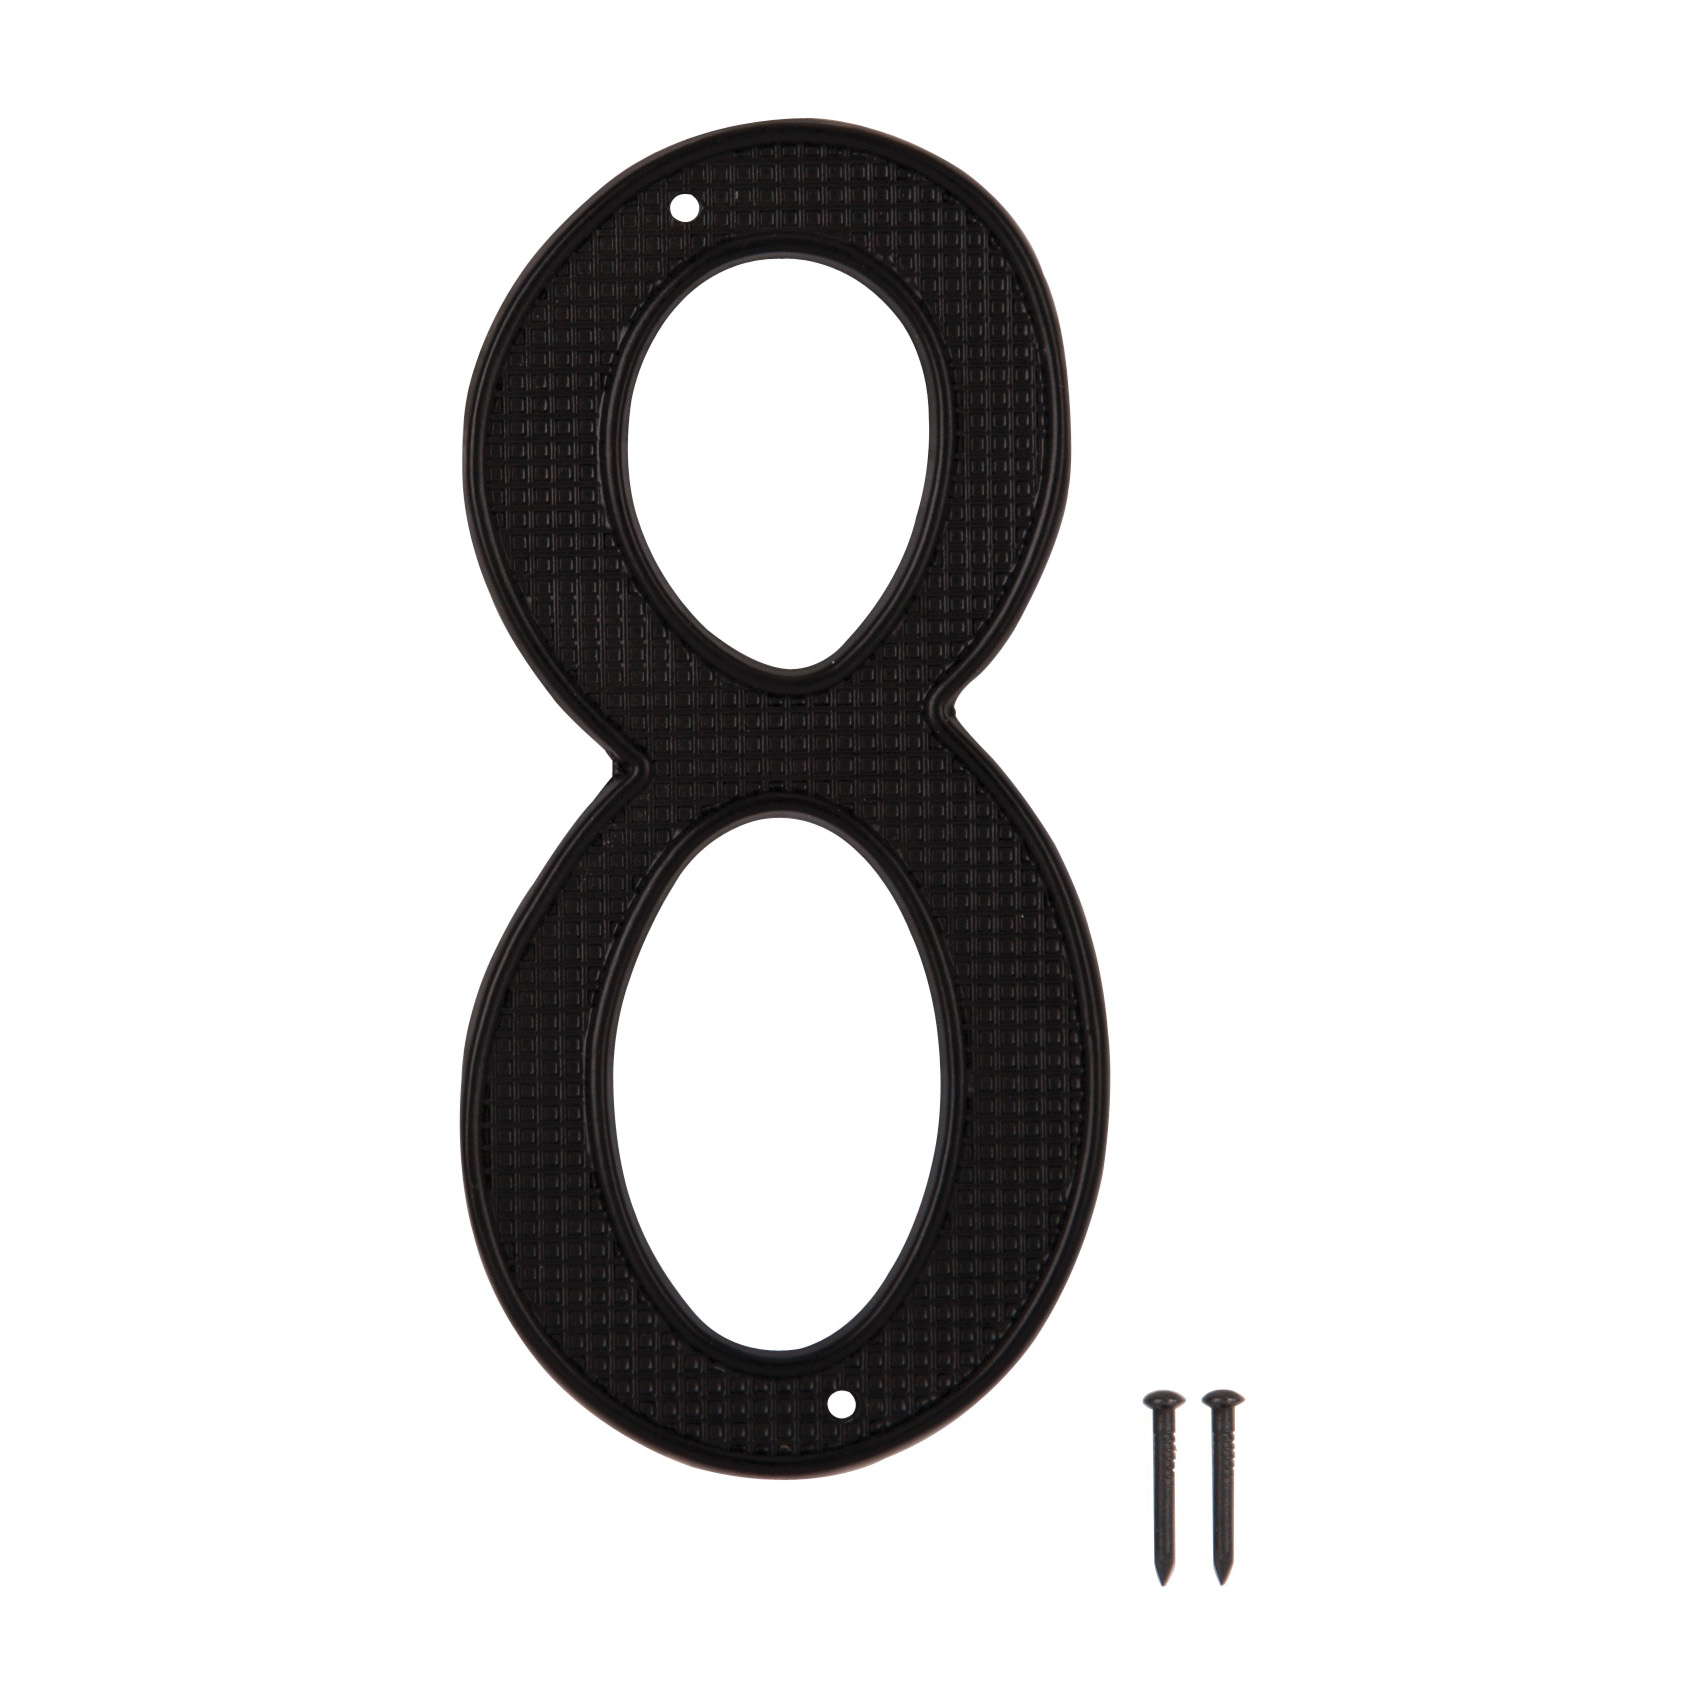 N-018-PS House Number, Character: 8, 4 in H Character, 2.28 in W Character